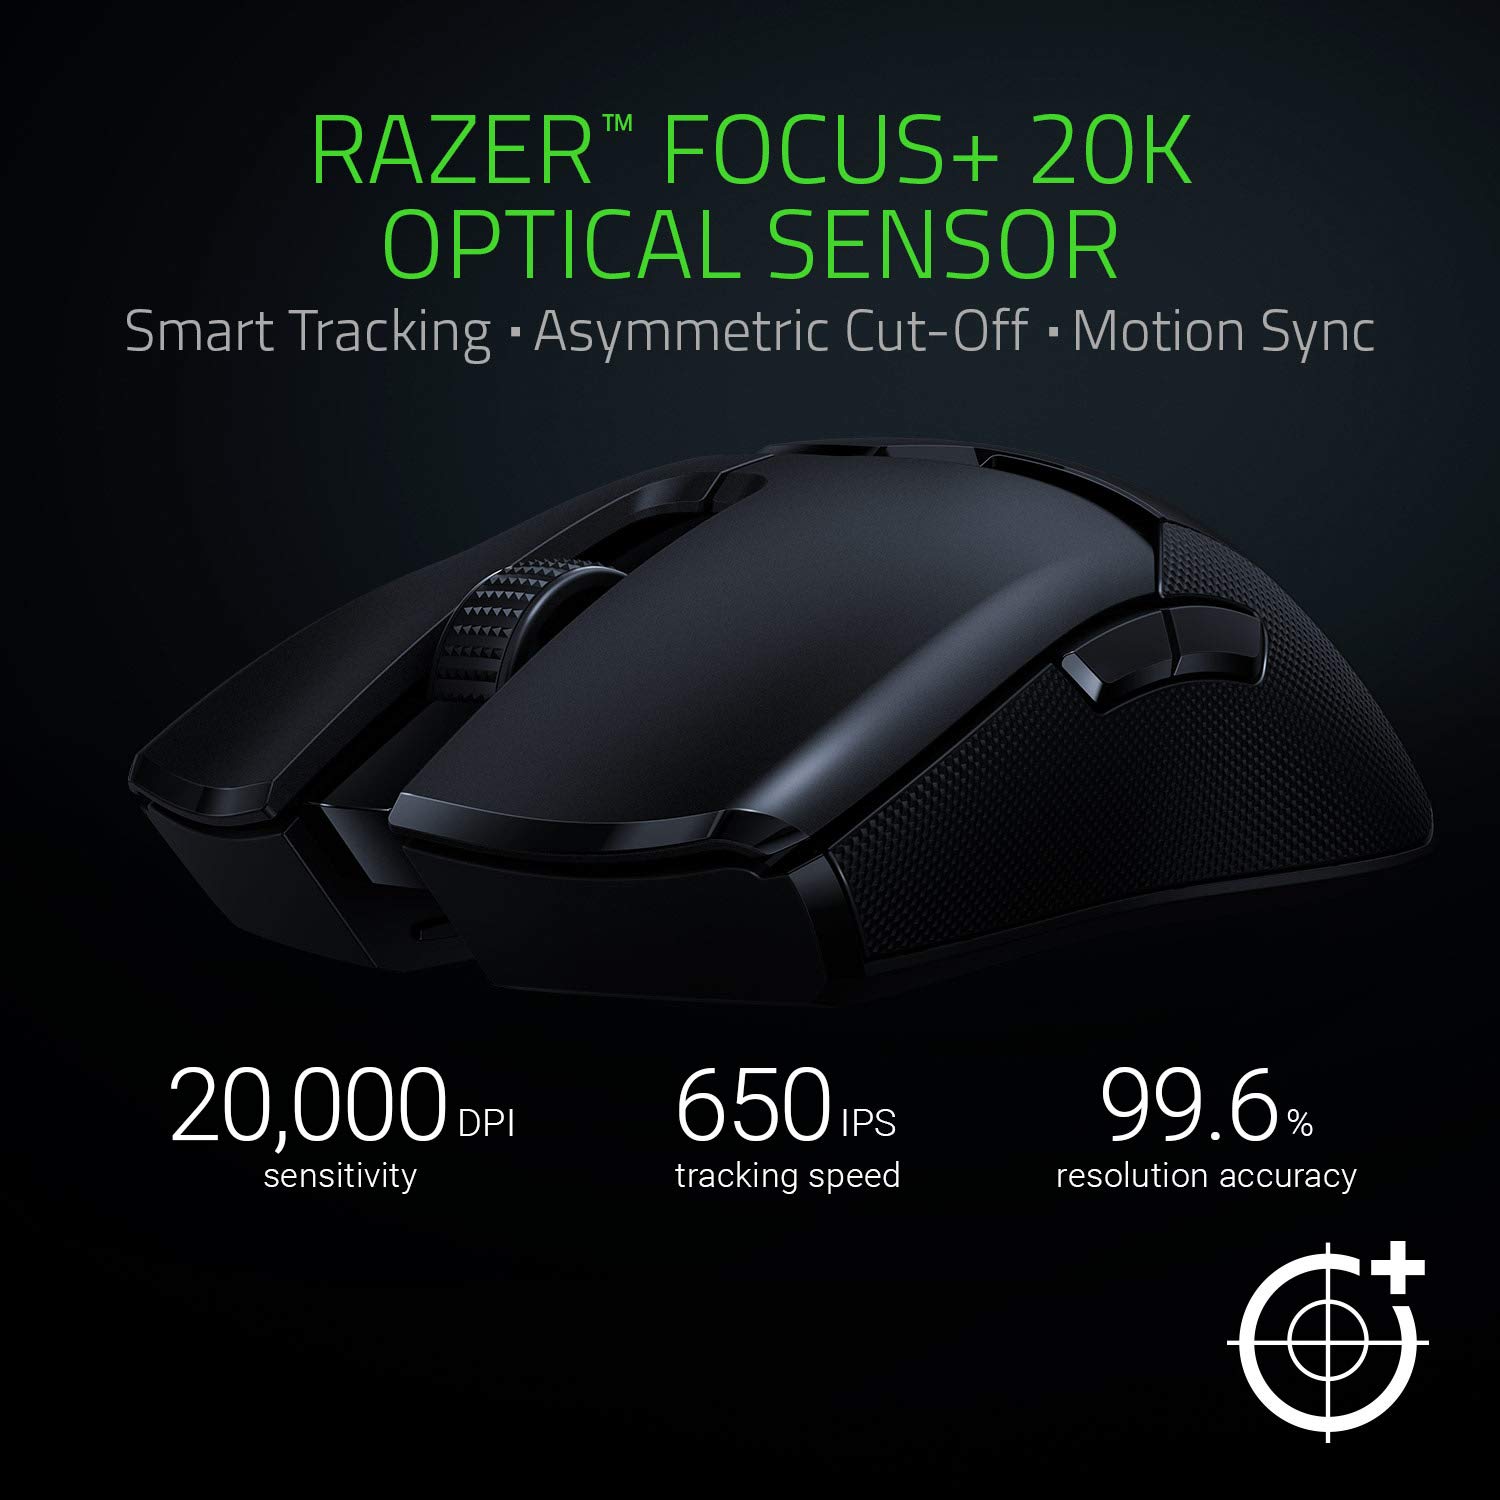 Razer Viper Ultimate Lightweight Wireless Gaming Mouse & RGB Charging Dock: Fastest Gaming Switches - 20K DPI Optical Sensor - Chroma Lighting - 8 Programmable Buttons - 70 Hr Battery - Classic Black - image 2 of 7